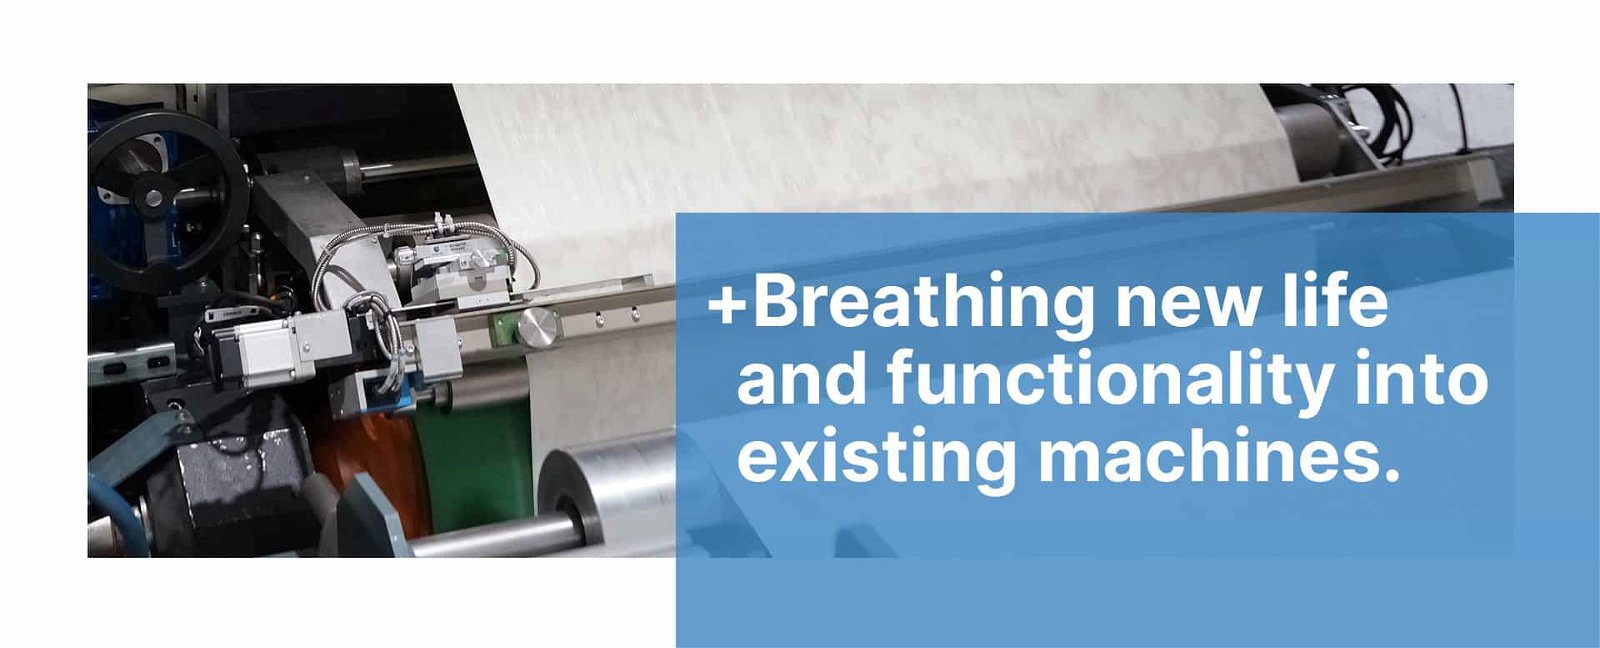 Breathing new life and functionality into existing machines